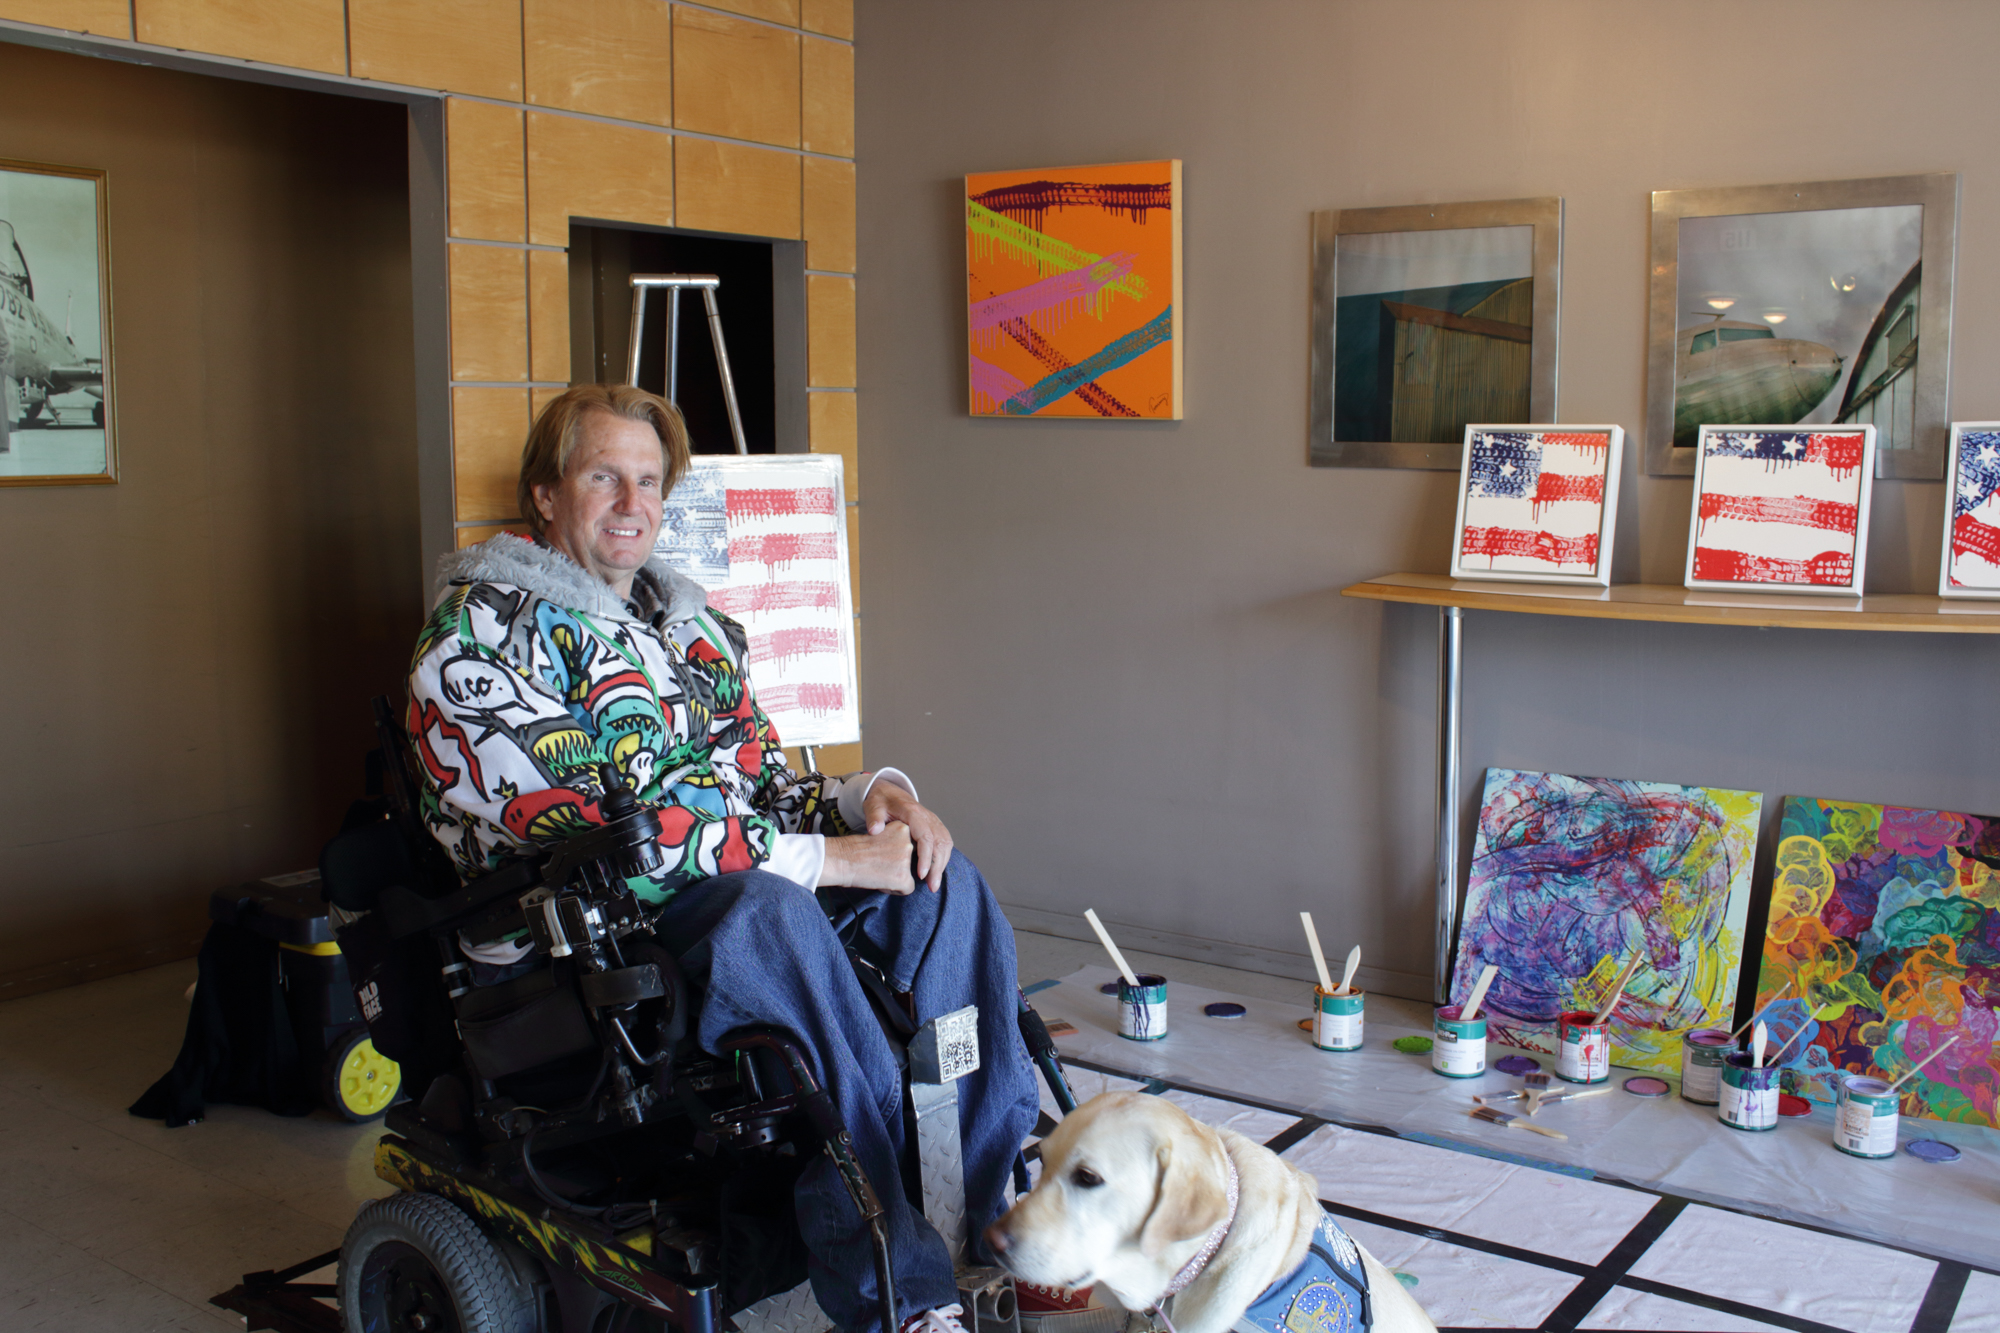  Tommy Hollenstein, wheelchair-bound quadriplegic artist, poses with his artwork made with the wheels of his wheelchair and service dog at the 12 Annual Santa Monica ArtWalk on March 24th, 2018 in Santa Monica, California. (Heather Creamer/ Corsair P